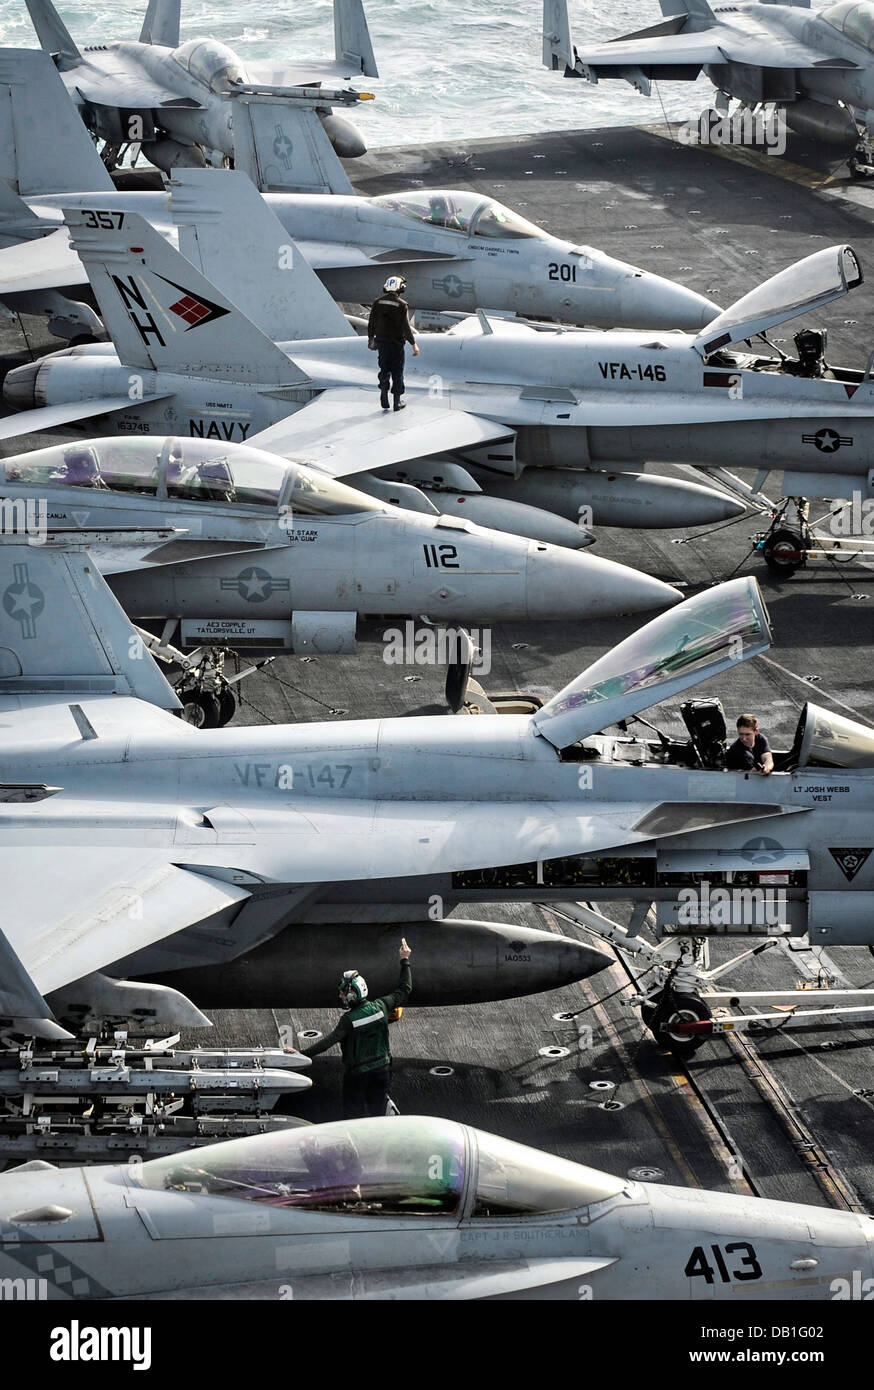 US sailors prepare aircraft for operations on the flight deck of the aircraft carrier USS Nimitz July 20, 2013 in the North Arabian Sea. Nimitz Strike Group is deployed to the U.S. 5th Fleet area of responsibility conducting maritime security operations, theater security cooperation efforts and support missions for Operation Enduring Freedom. Stock Photo